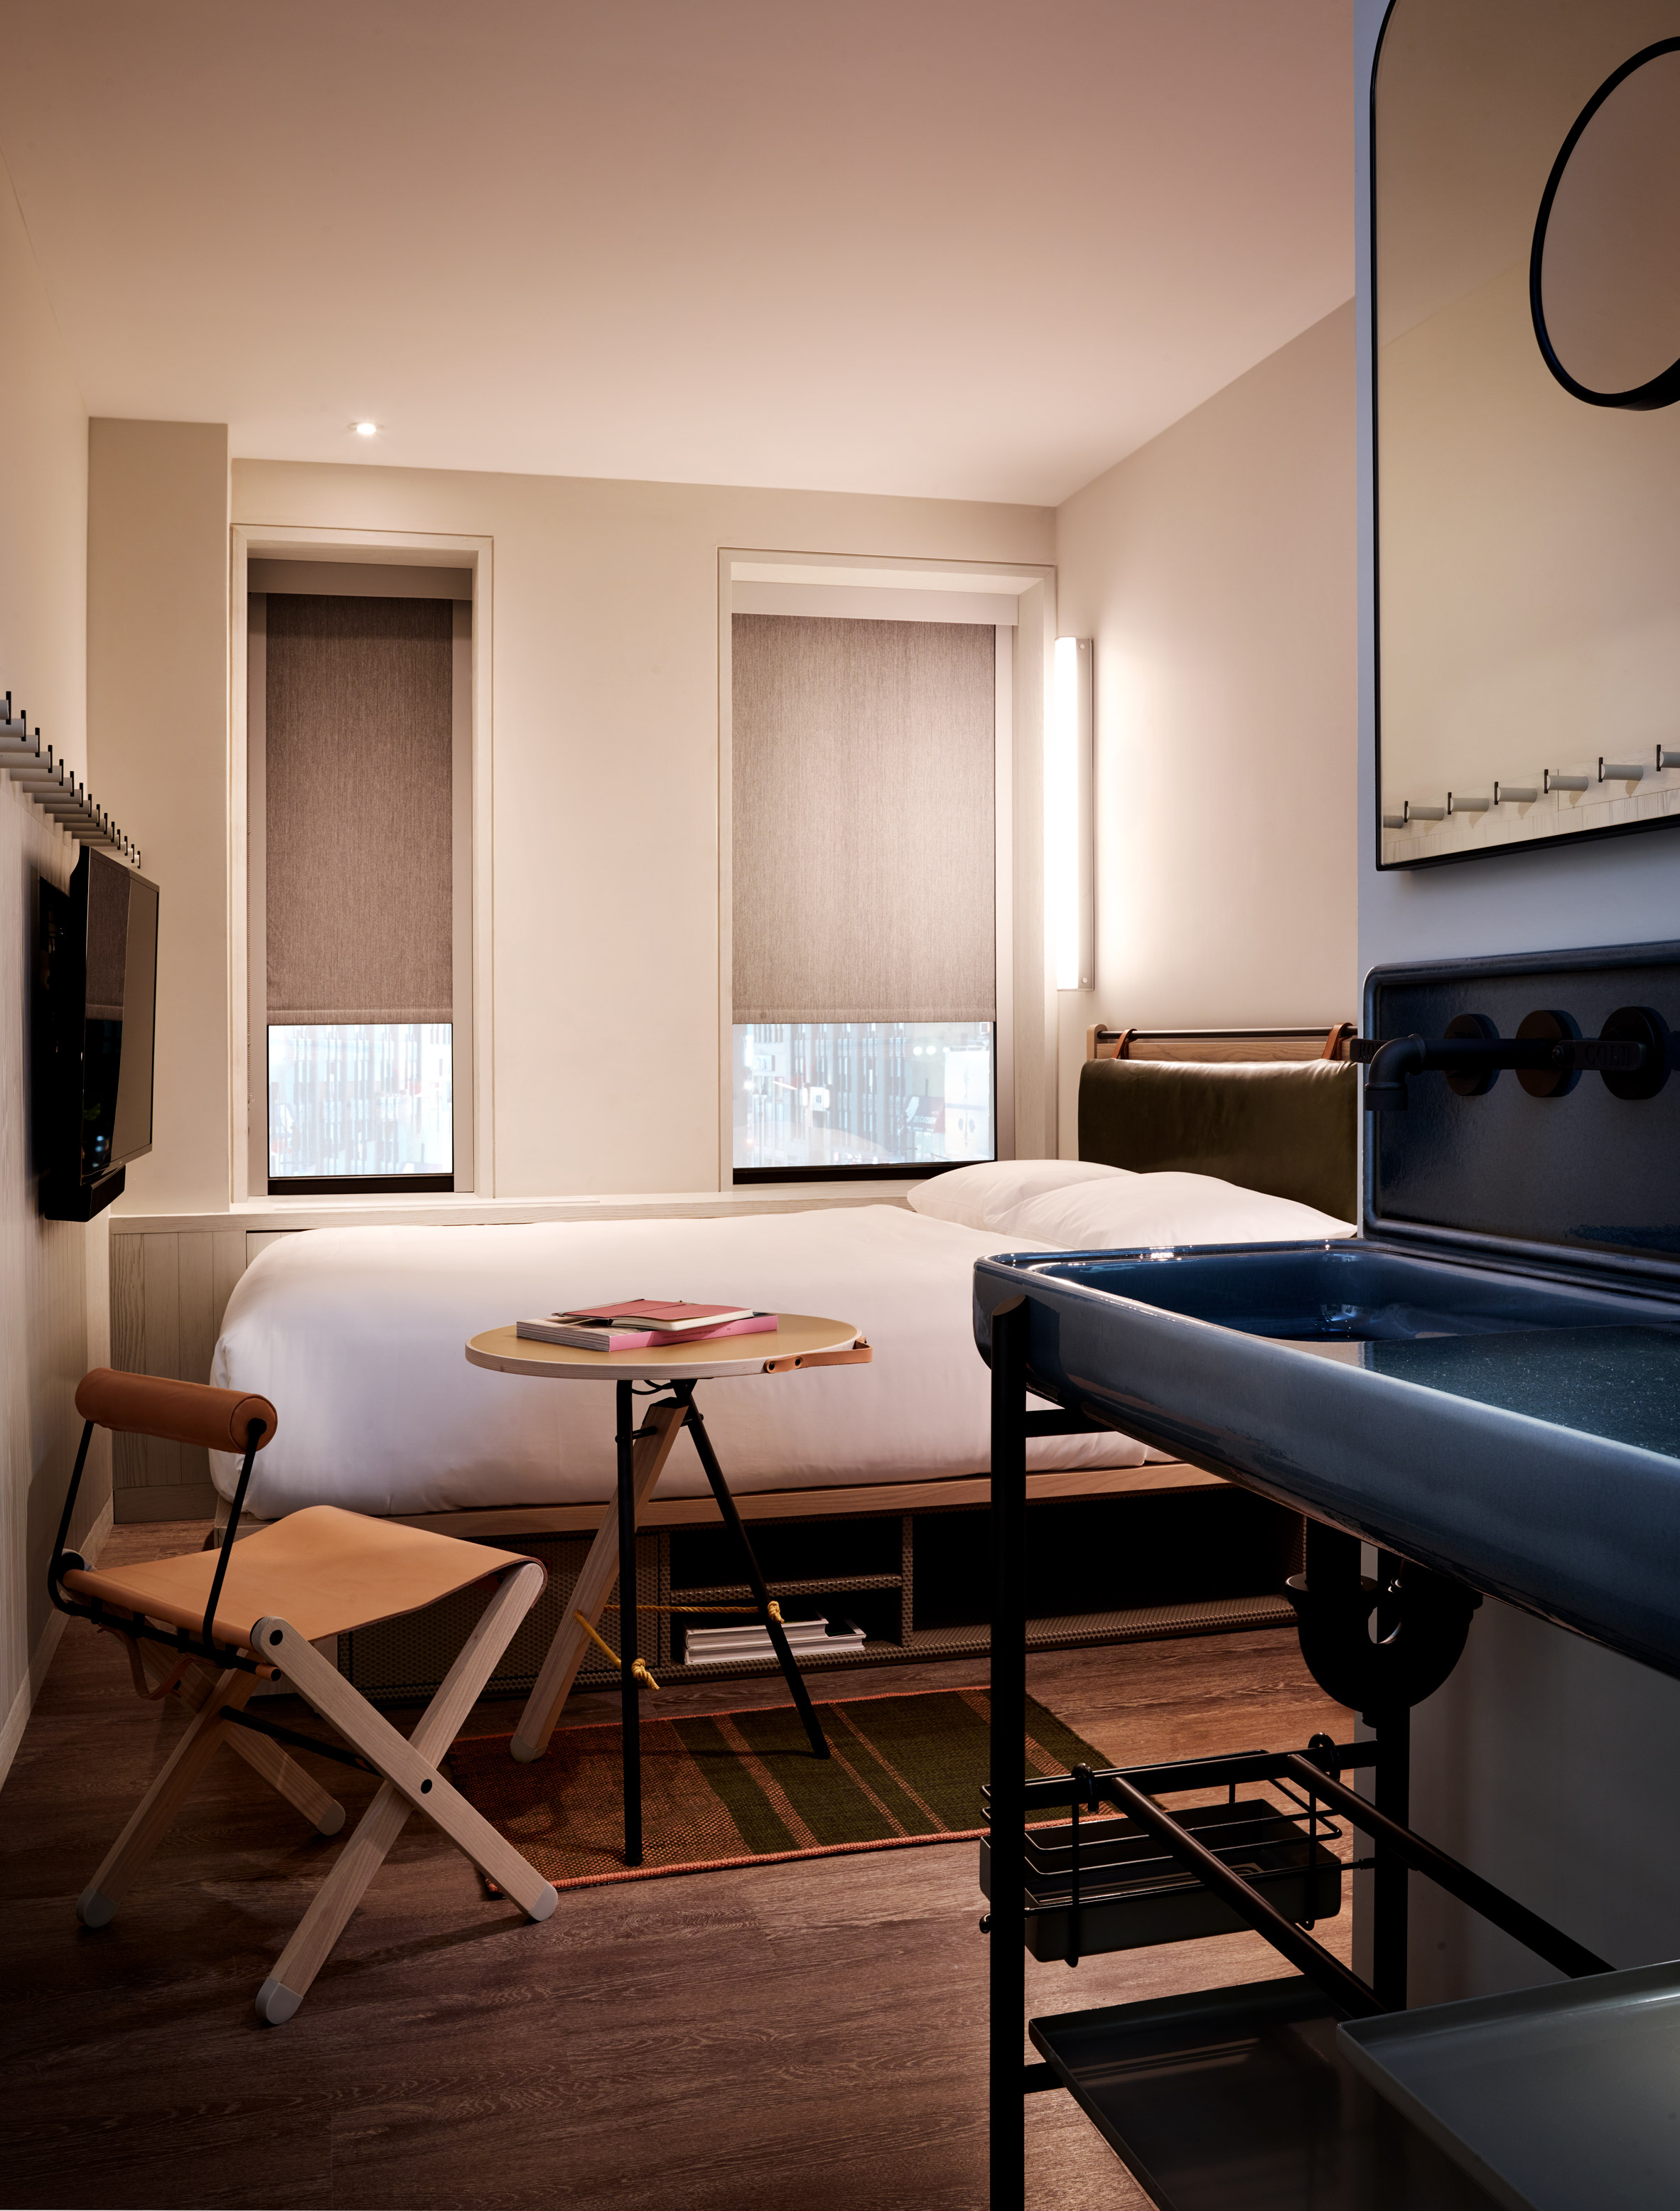 Foldaway chairs and bunks furnish bedrooms at Moxy Times Square hotel